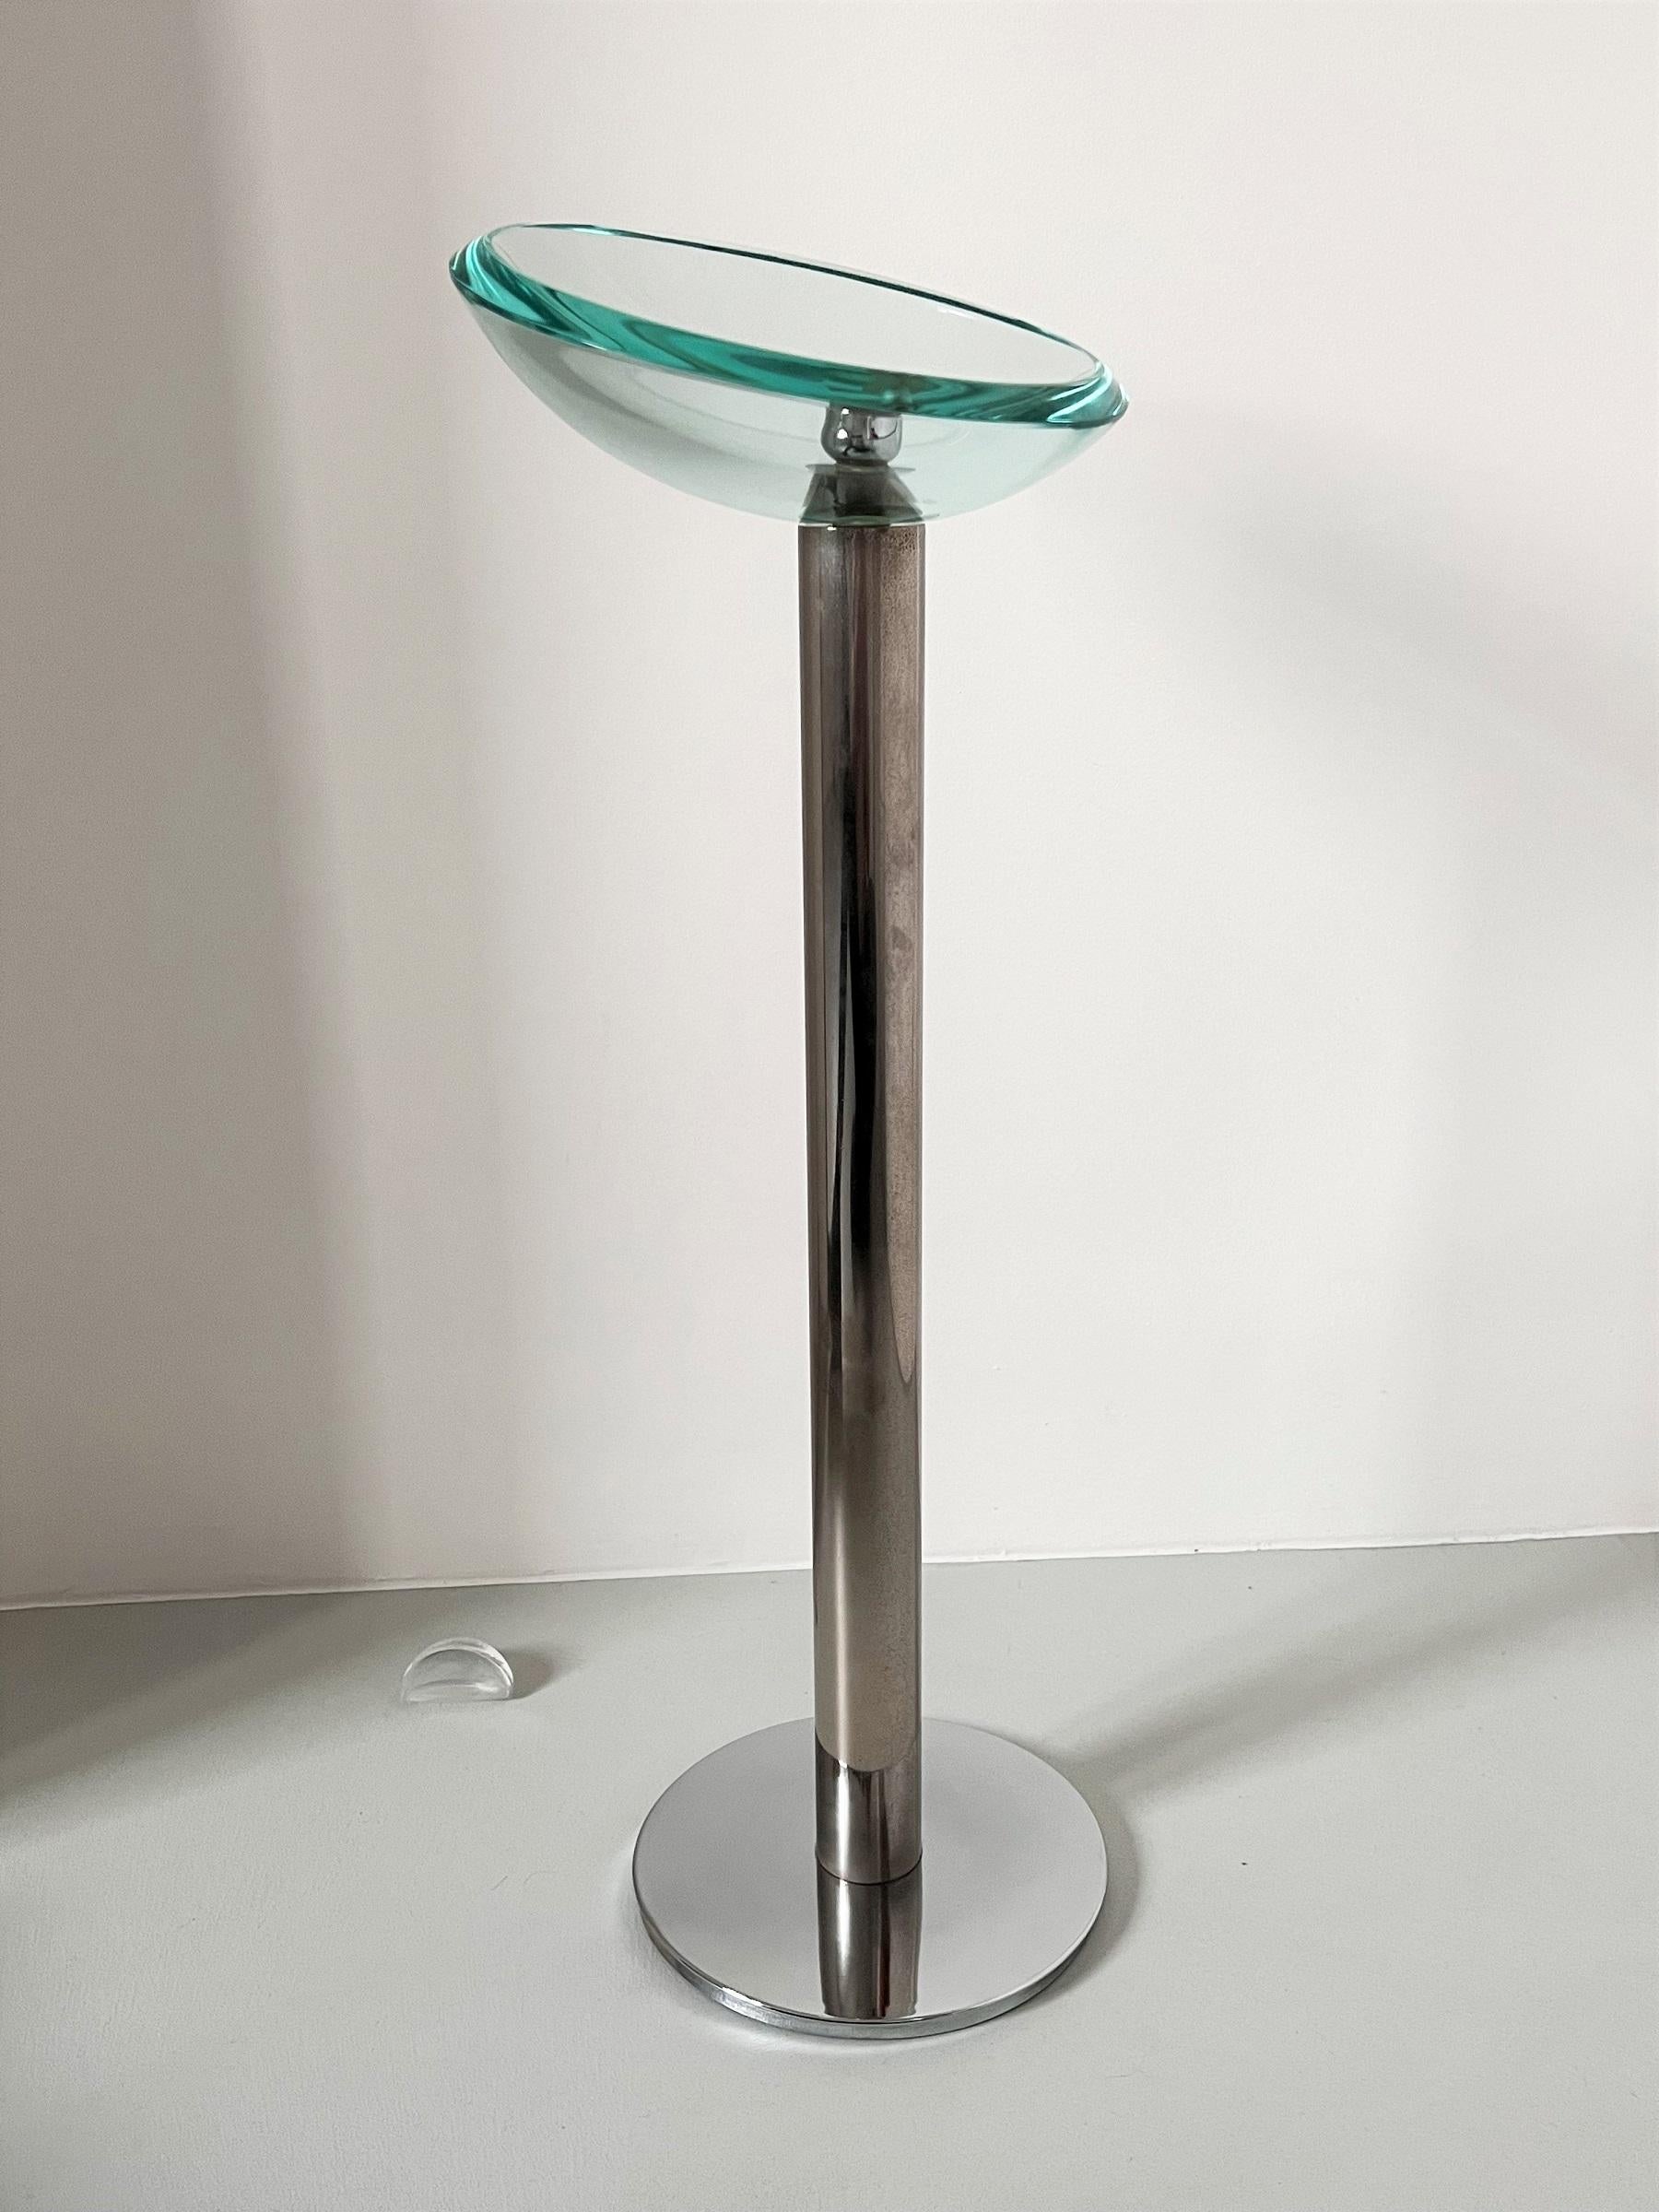 Gorgeous floor standing ashtray made of strong heavy stainless steel base and beautiful crystal cut glass bowl.
The hand-crafted crystal bowl is made of transparent glass which reflects in green color and is made of excellent quality and